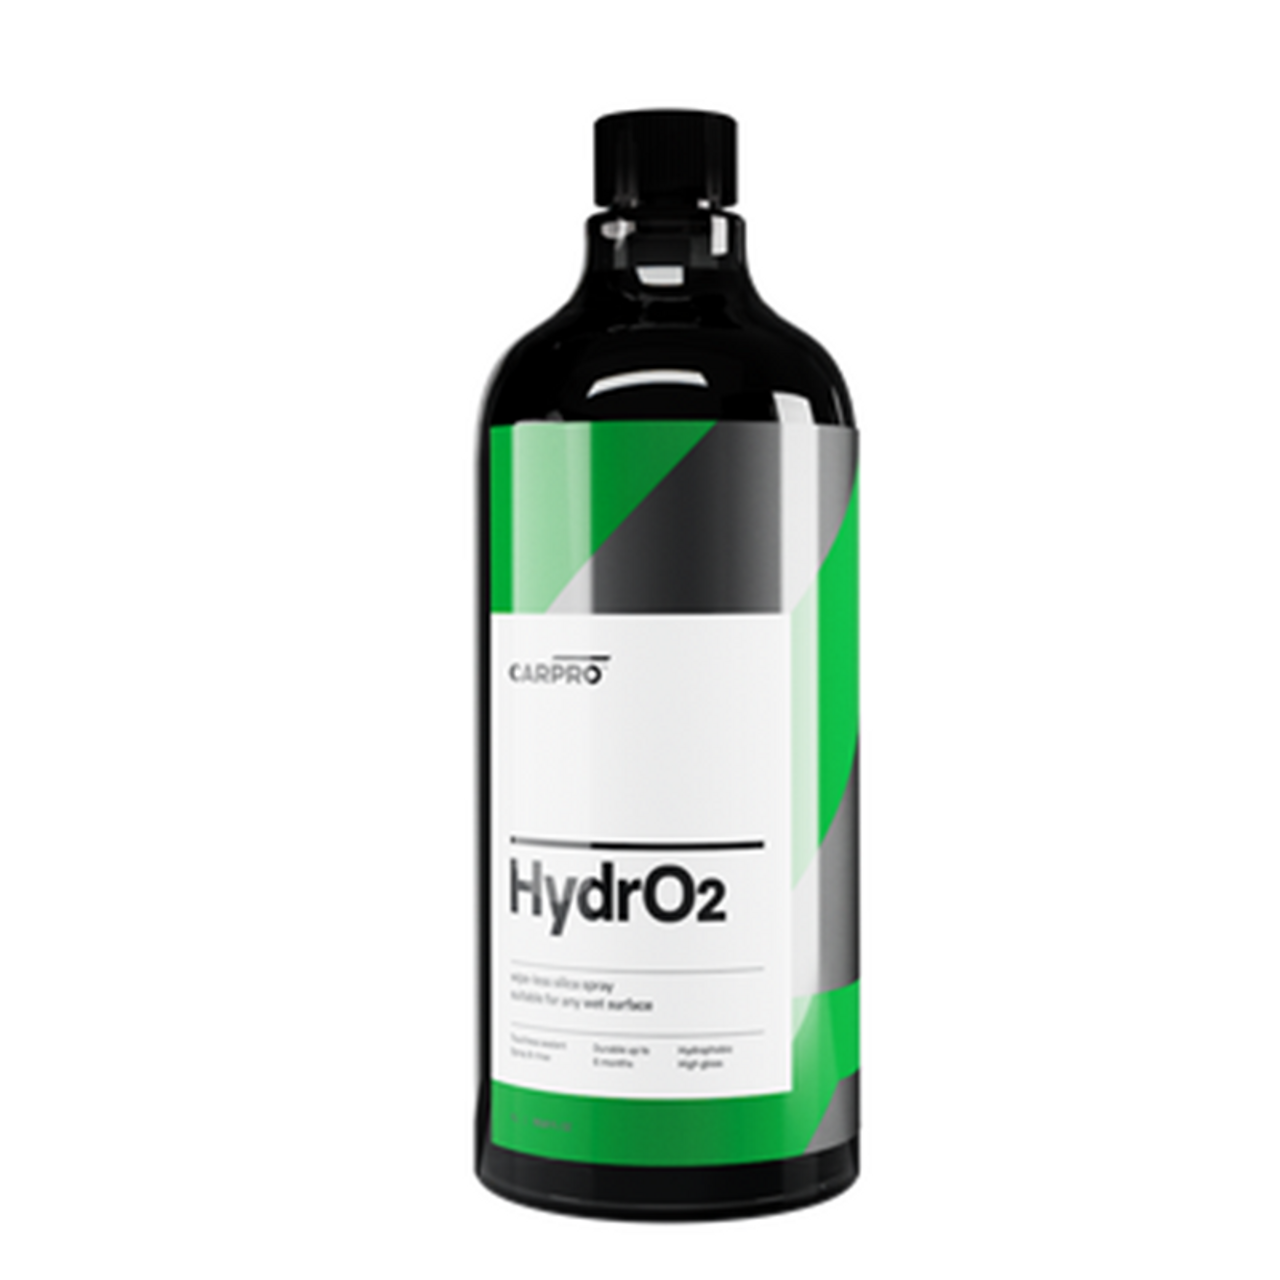 CARPRO HydrO2 Touchless Sealant (1 Liter) Concentrate